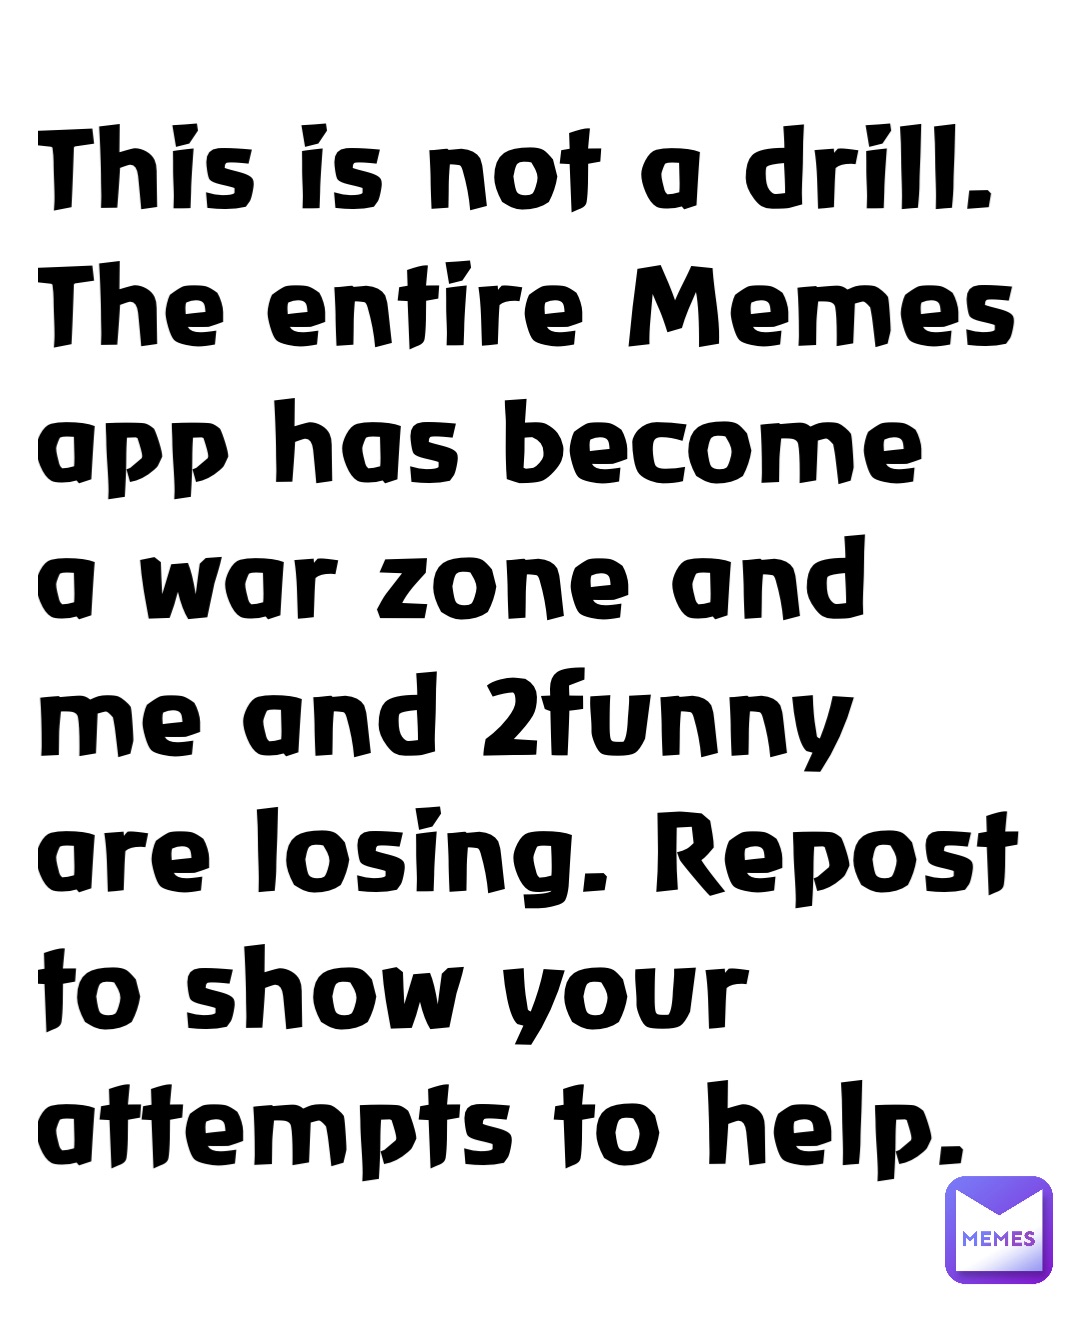 This is not a drill. The entire Memes app has become a war zone and me and 2funny are losing. Repost to show your attempts to help.